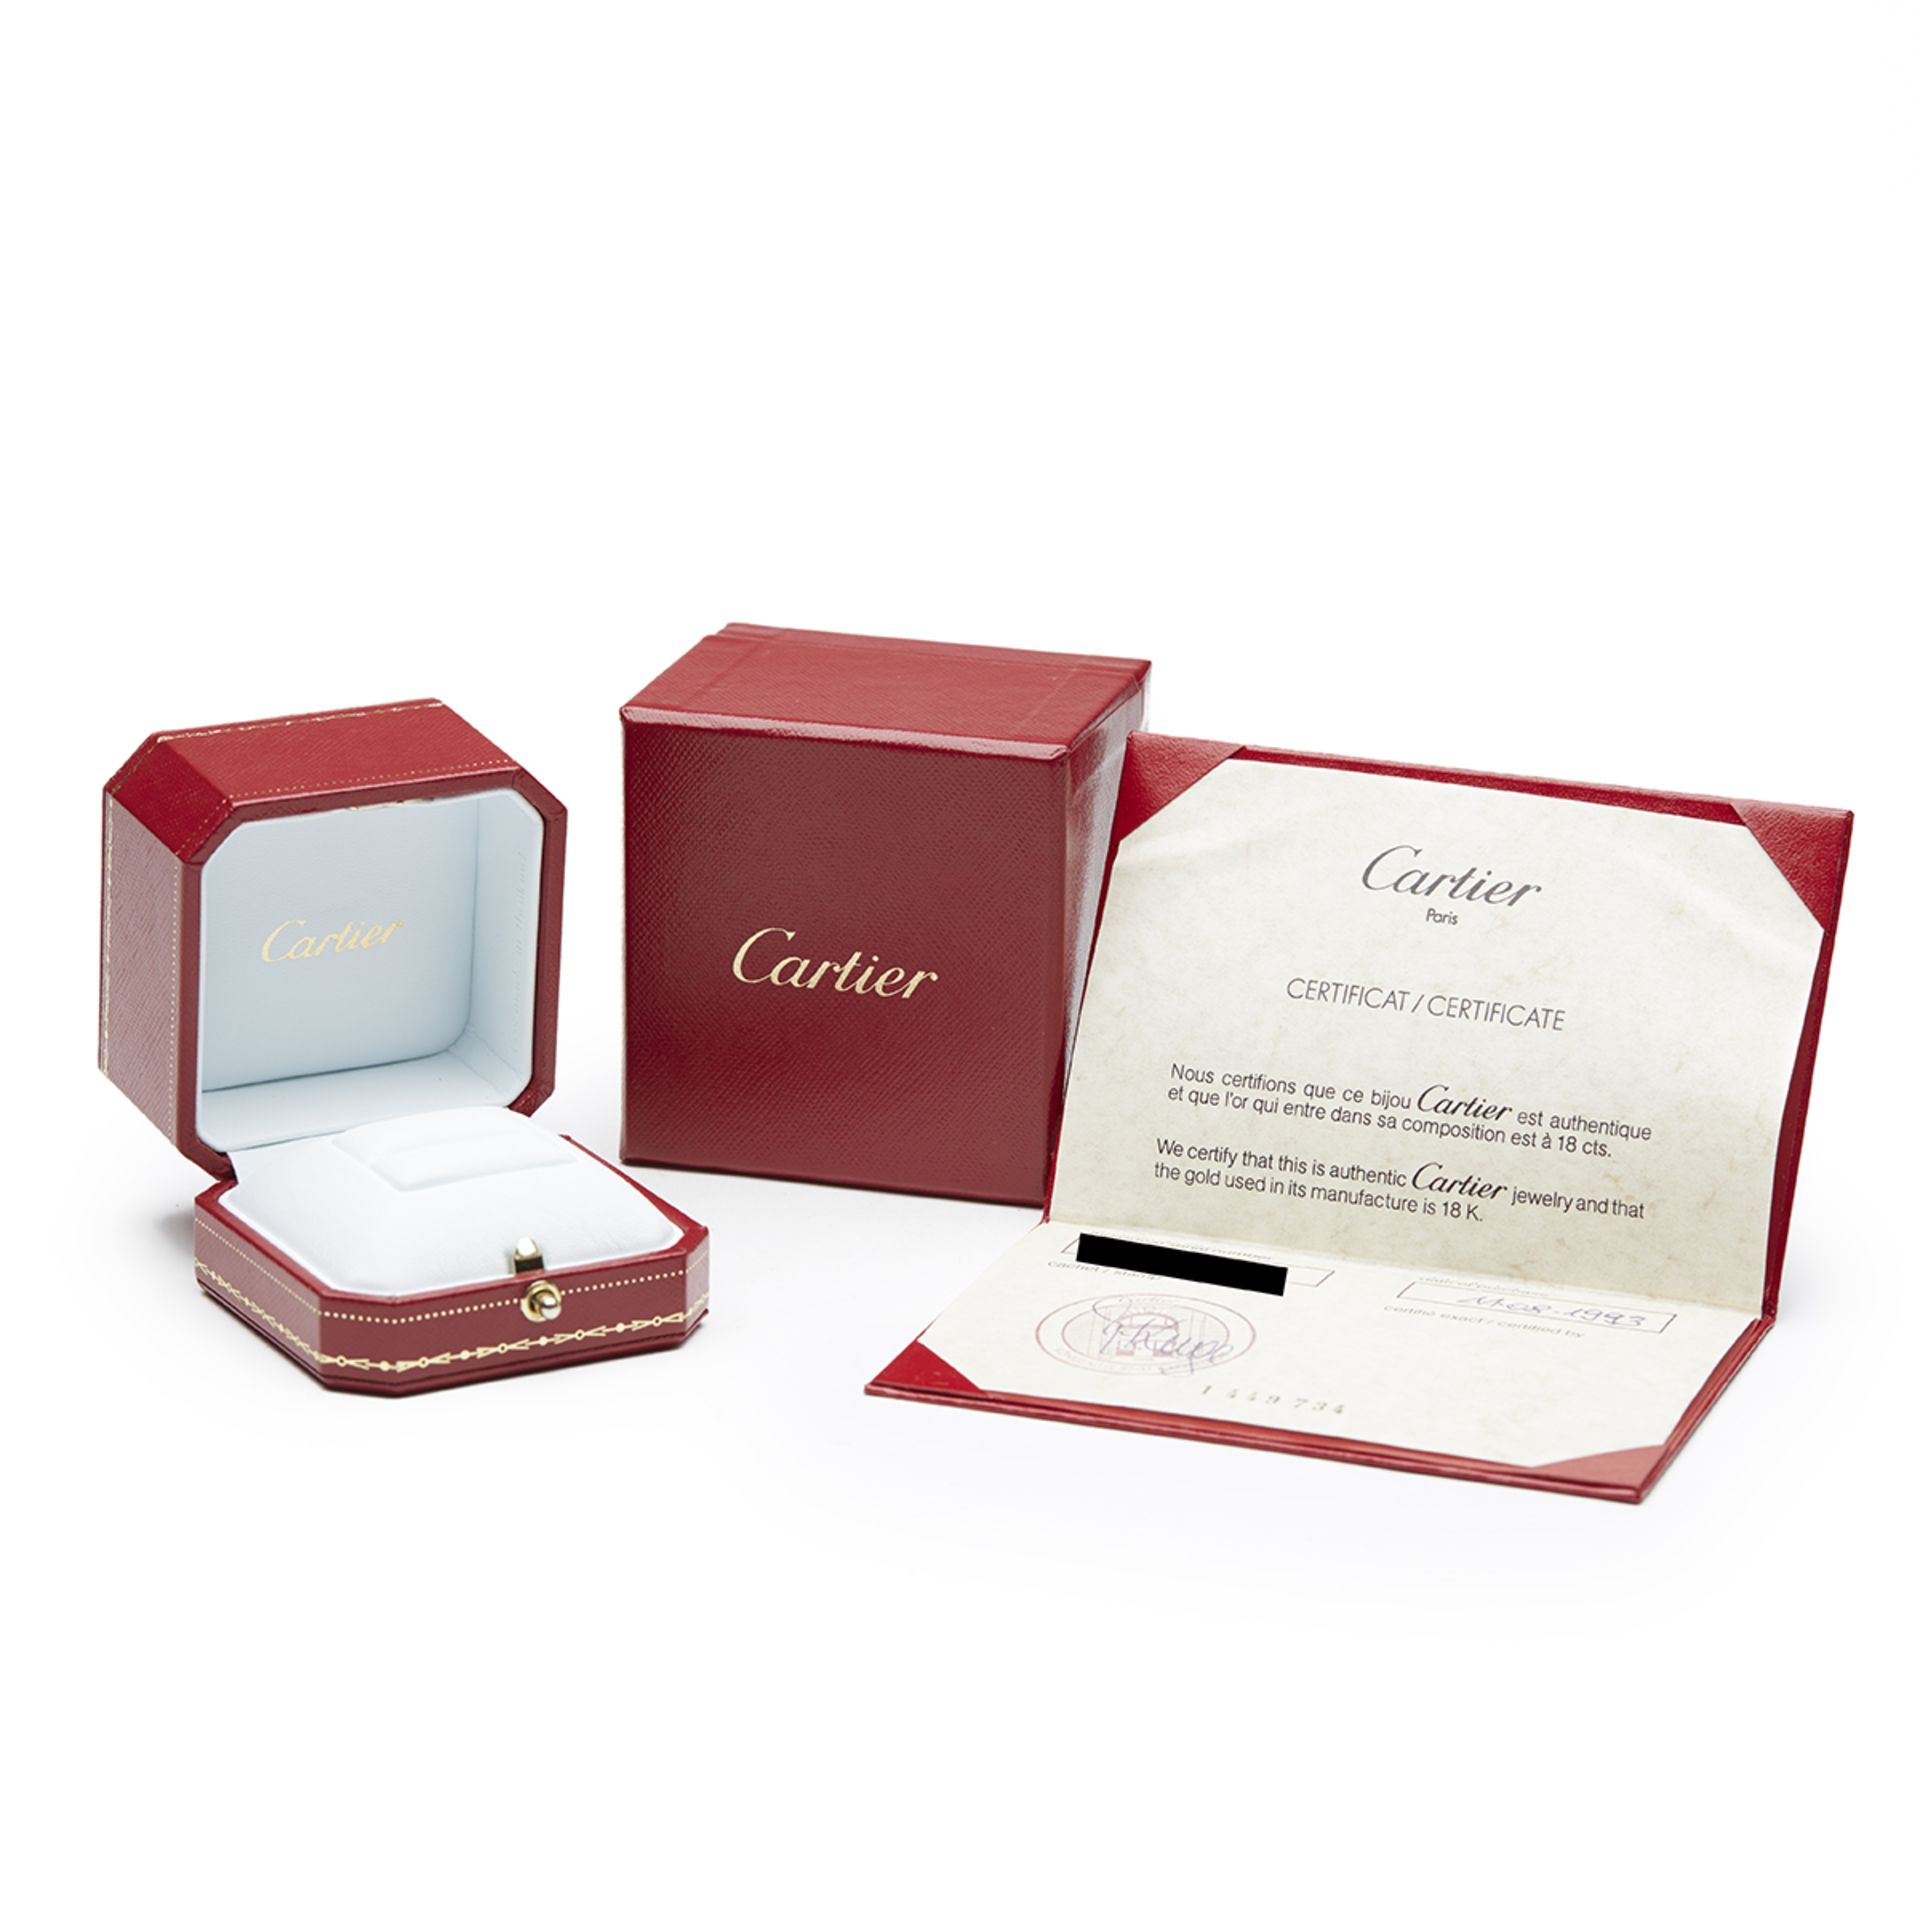 Cartier, 18k Yellow Gold 1.37ct Sapphire & 0.50ct Diamond Ring with Cartier Box & Cert / IGR Report - Image 8 of 12